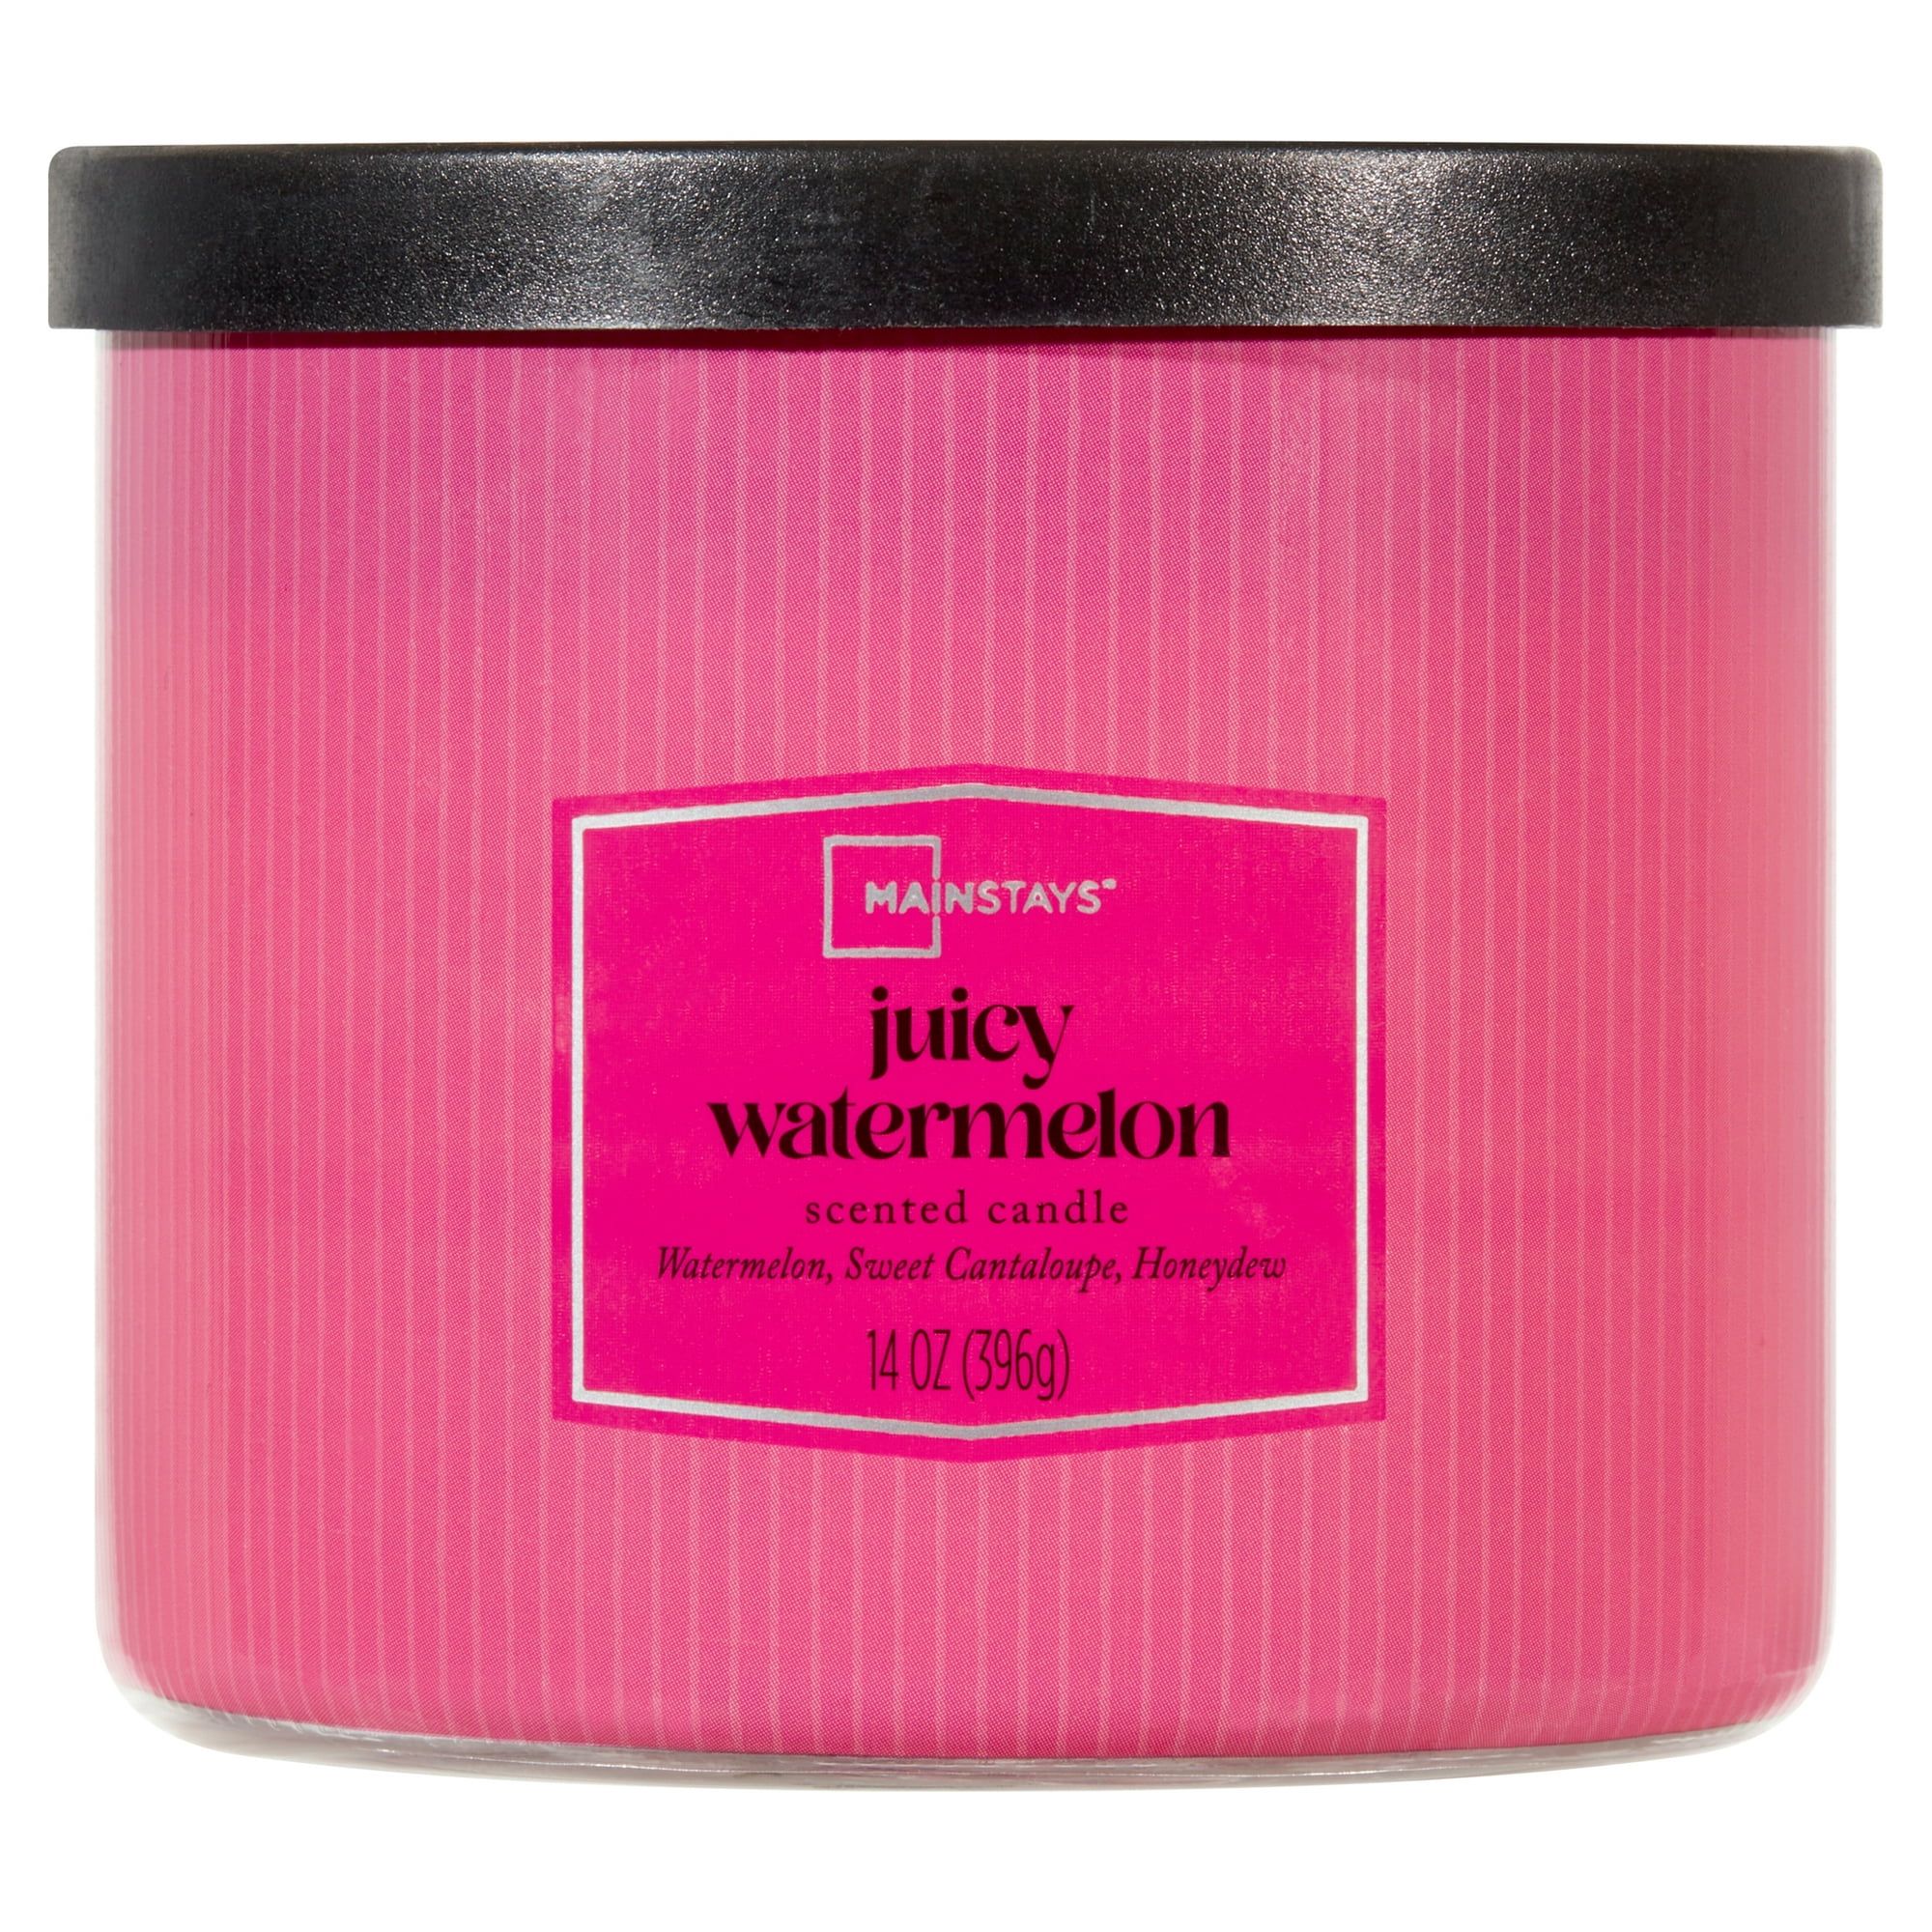 Mainstays 3-Wick Textured Wrapped Juicy Watermelon Scented Candle, 14 oz | Walmart (US)